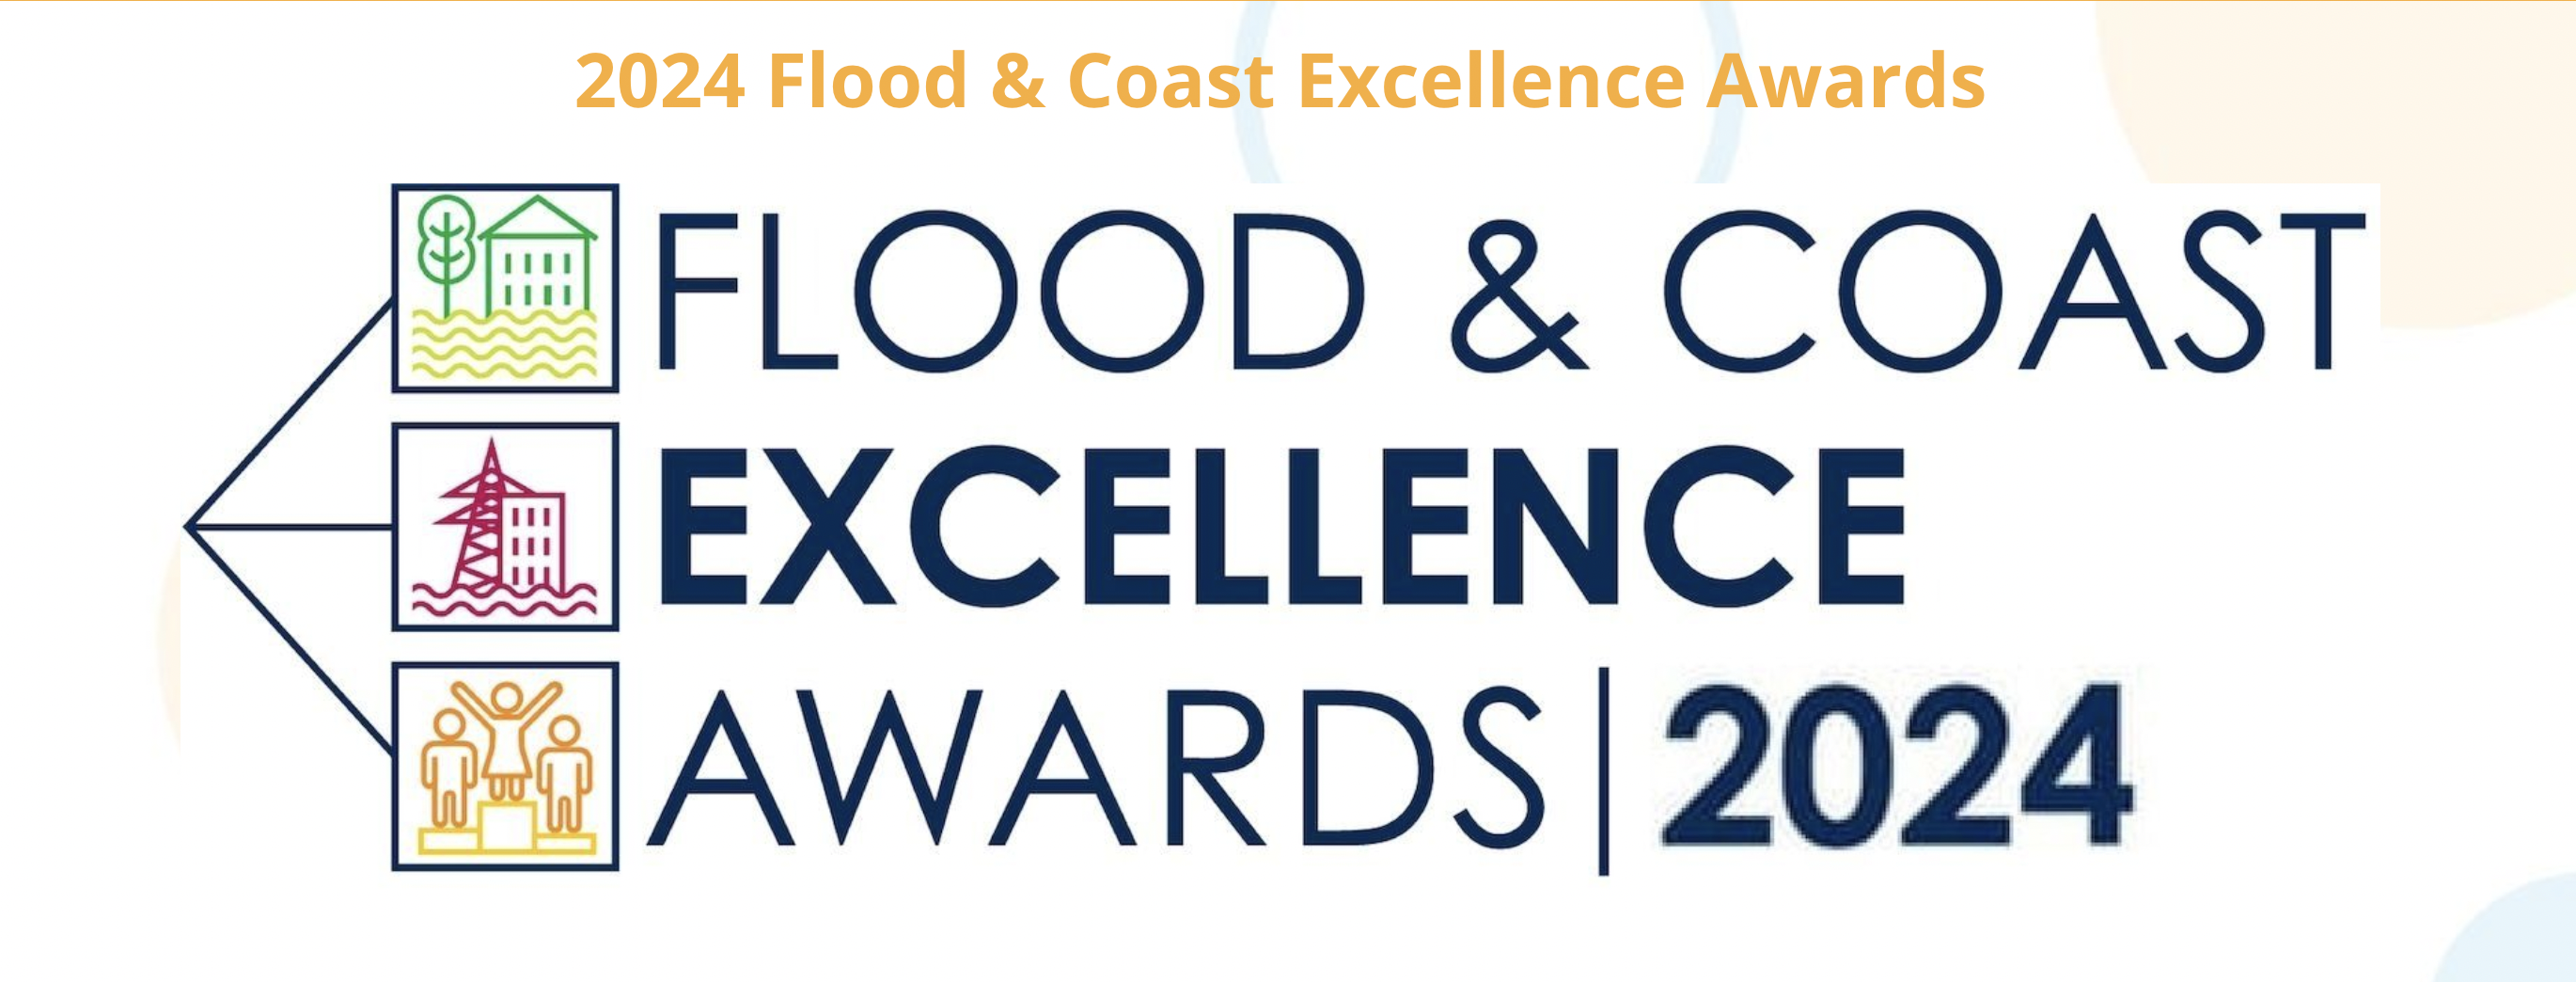 Environment Agency&rsquo;s Flood and Coast Excellence Awards 2024 now open!Do you have a project or innovation that manages flood risk, improves loc...